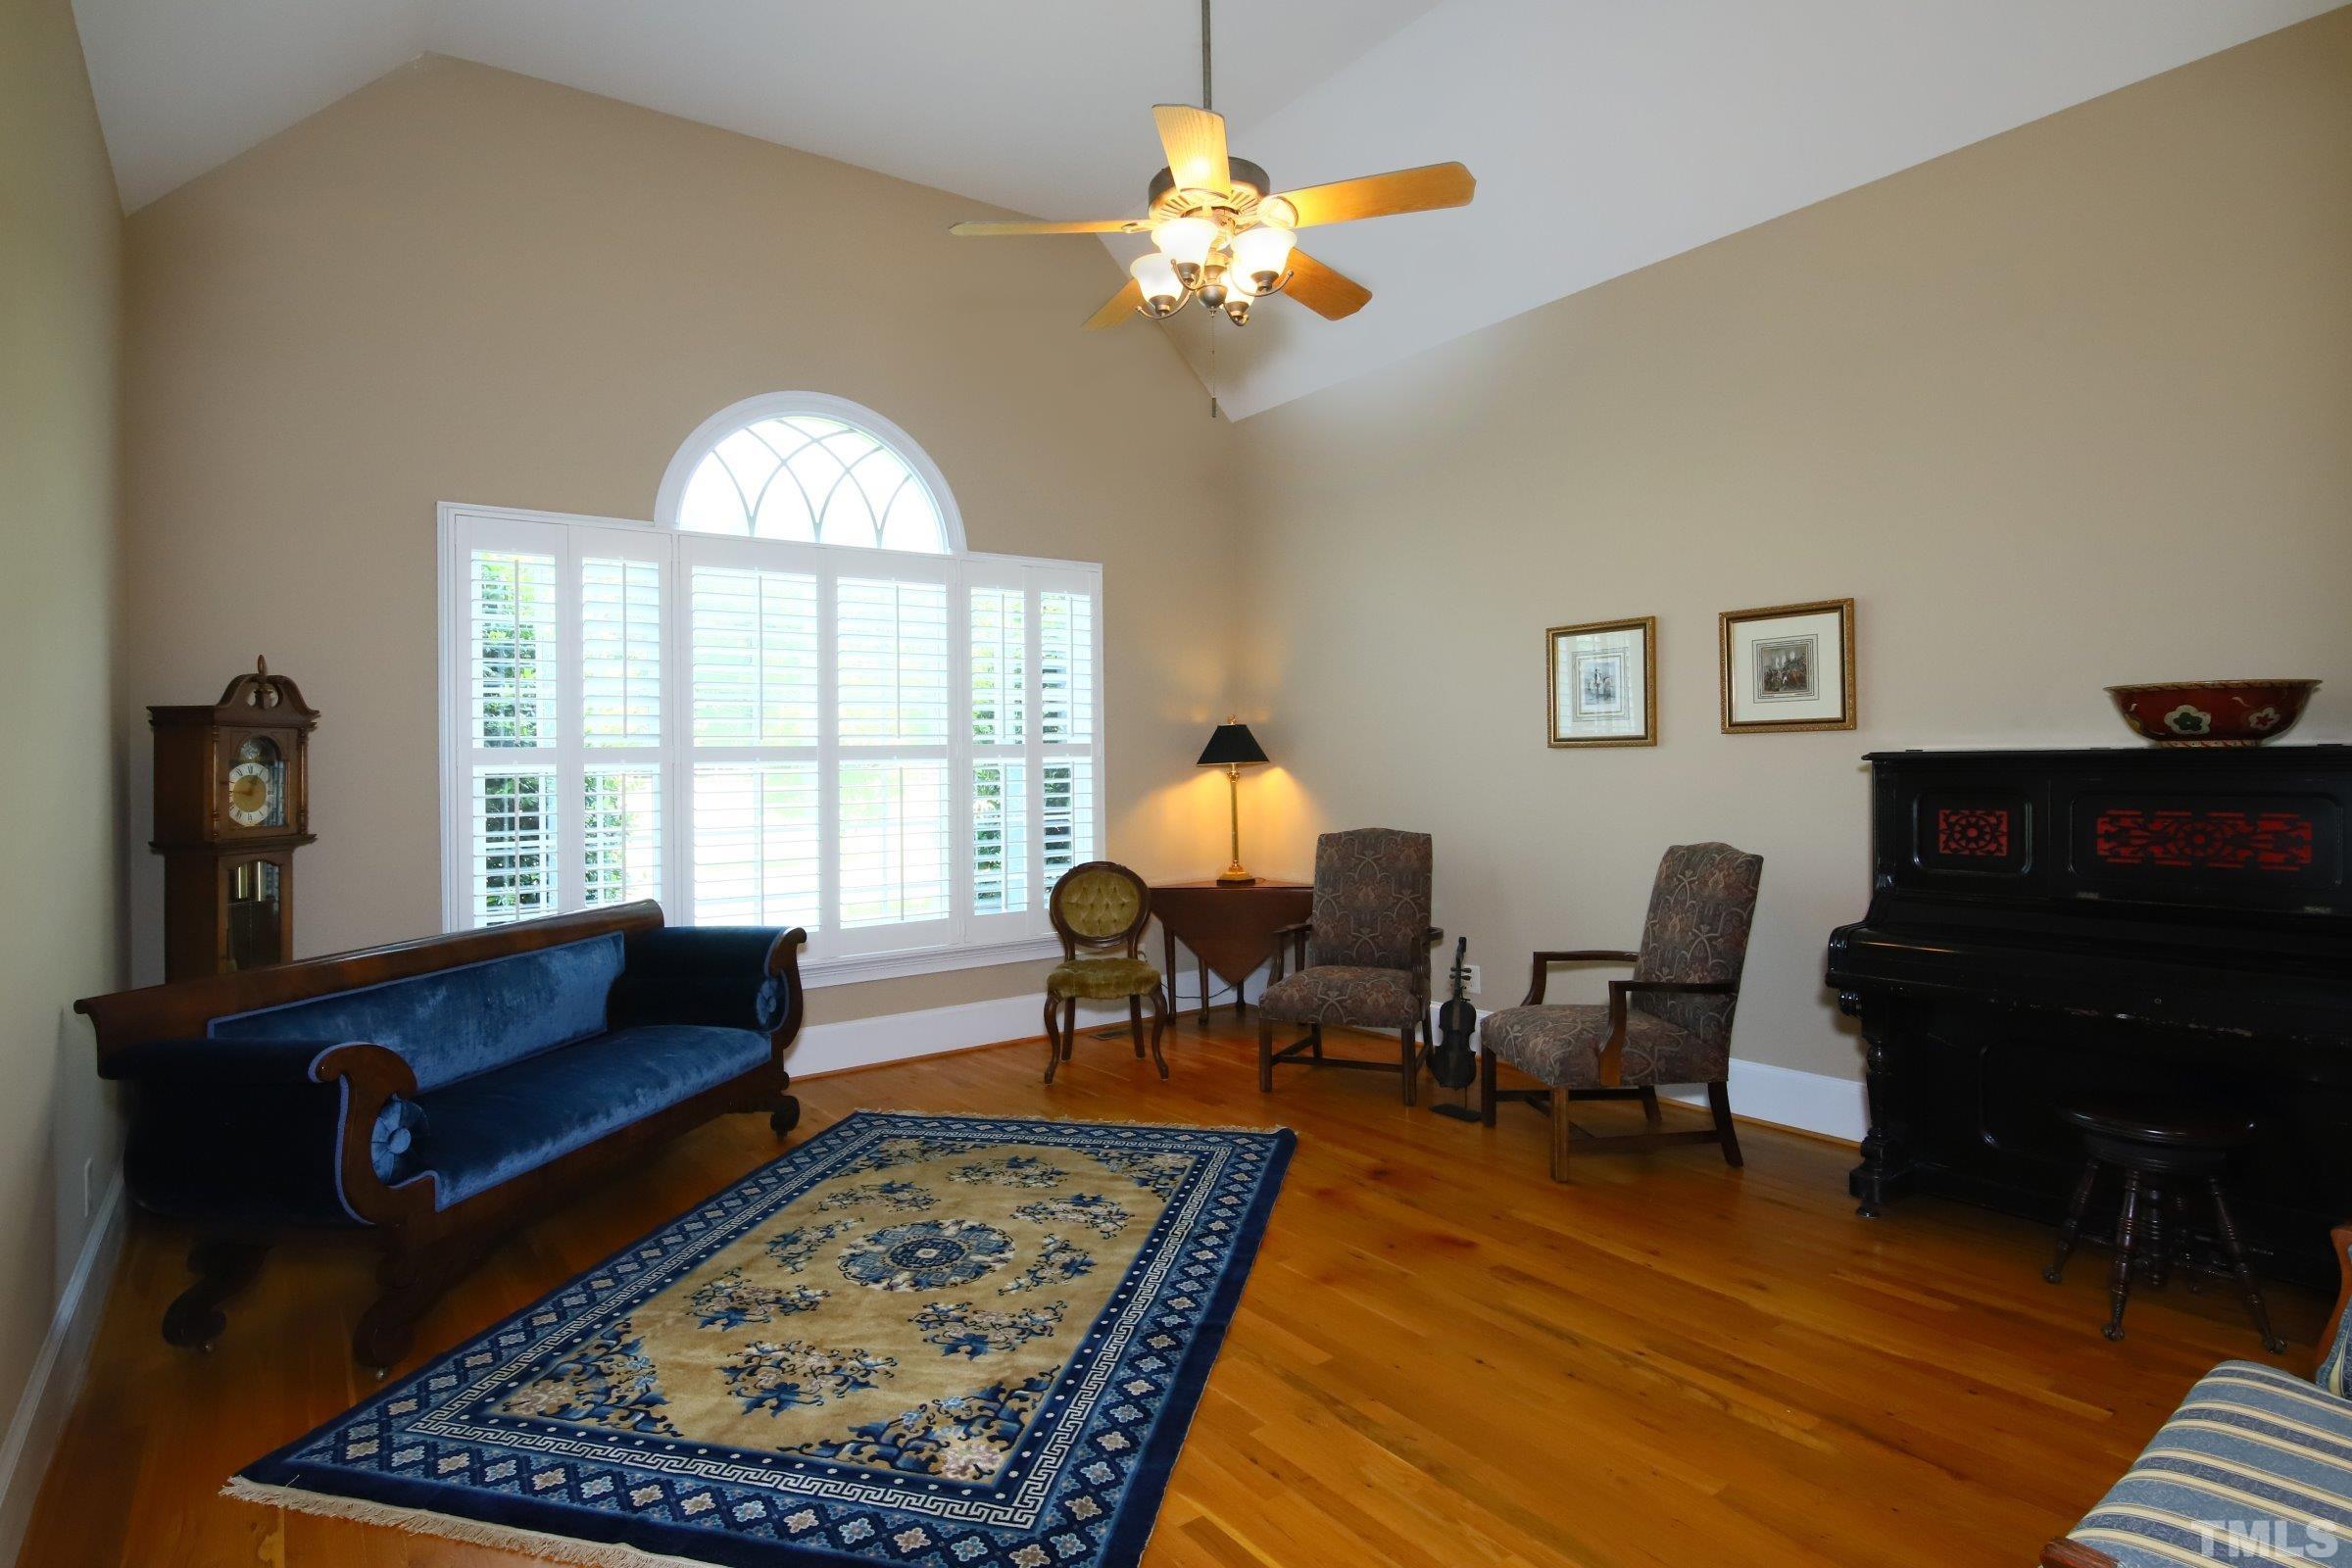 Lovely and large, the parlor is perfectly situated in the residence with soaring cathedral ceiling. It is private yet not isolated offering easy access to rest of the house. Ideally suited for in-home office, music room, conversations or many other uses.